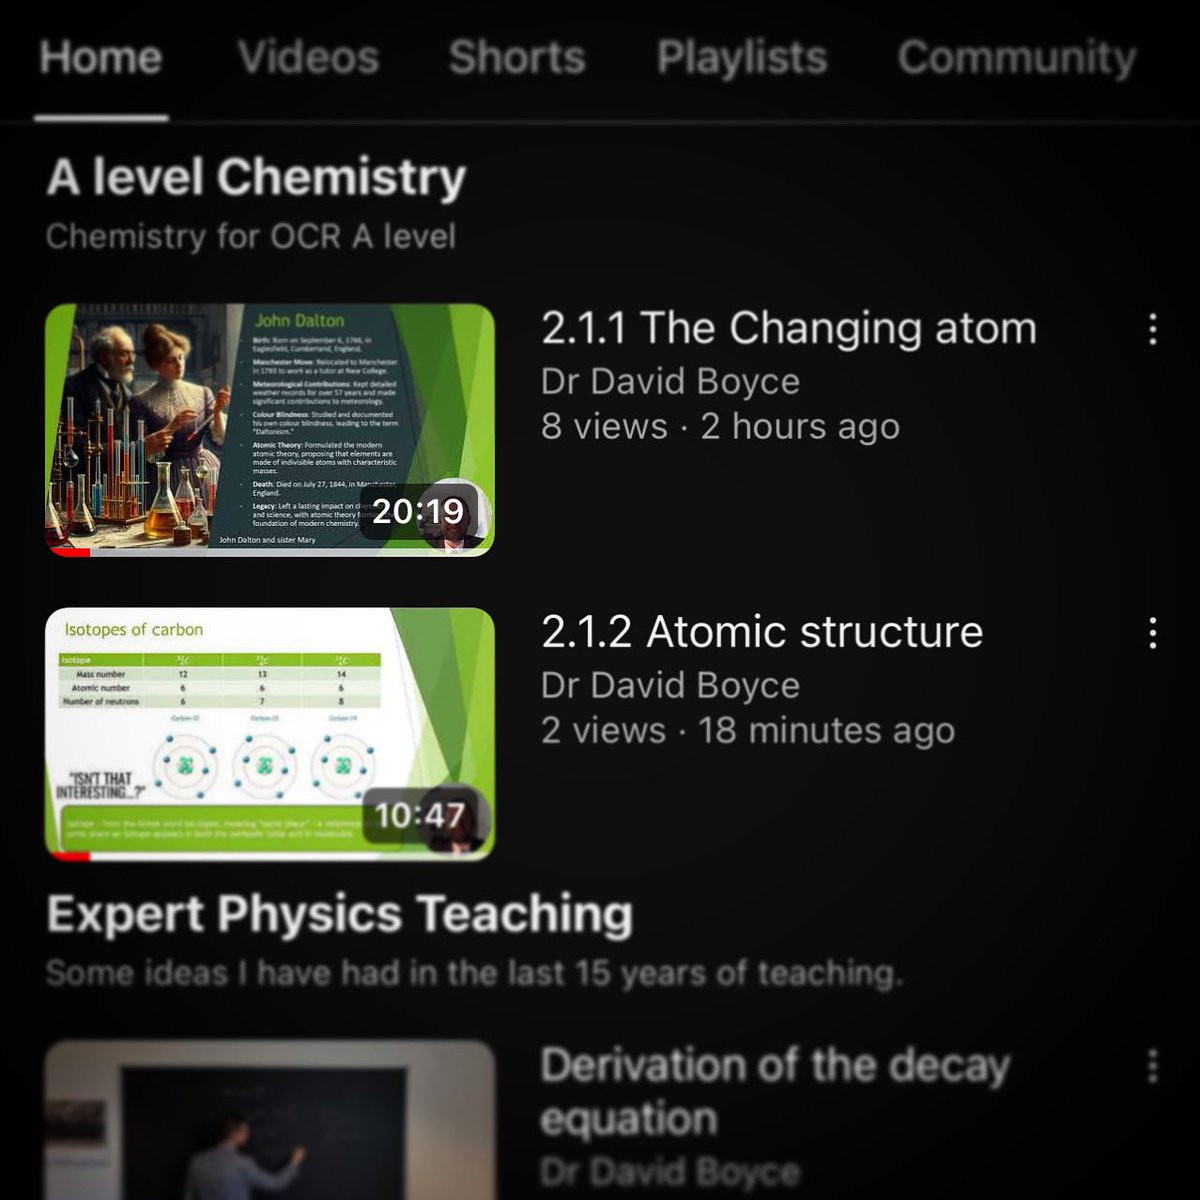 Wooop wooop. Chemistry content now on my YouTube channel. Go check it out! youtube.com/@drdavidboyce